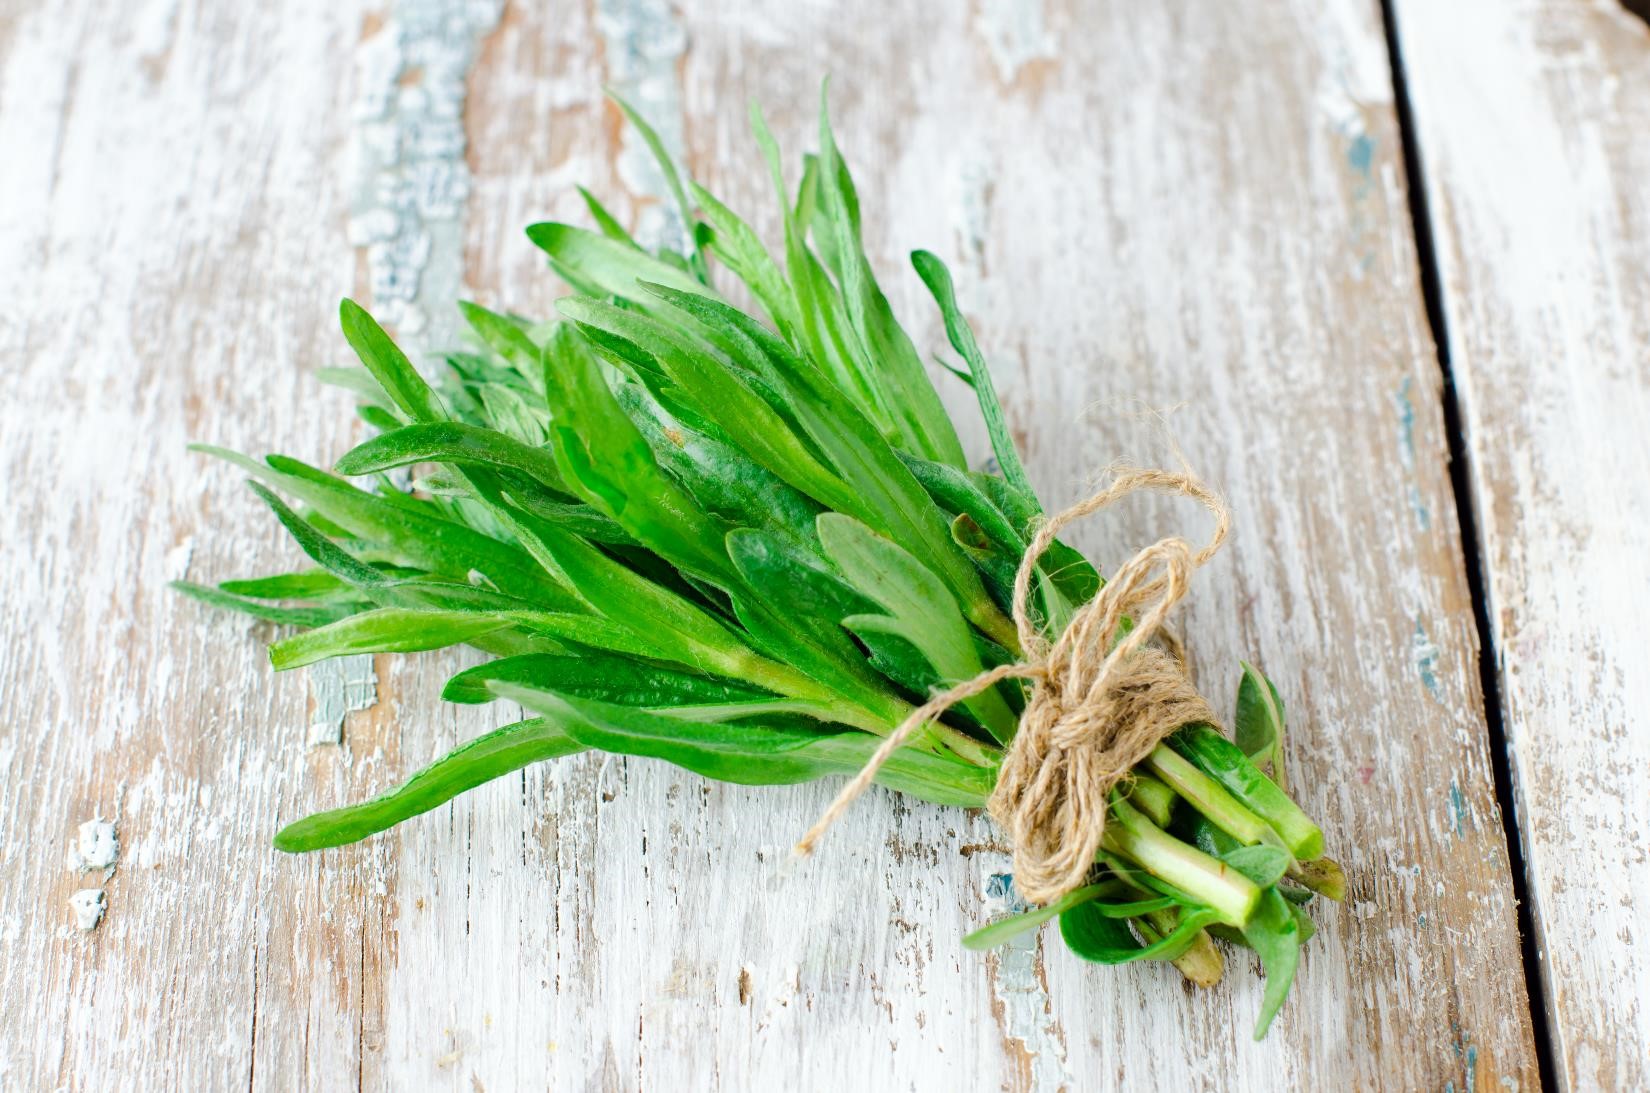 FIND OUT MORE ABOUT TARRAGON